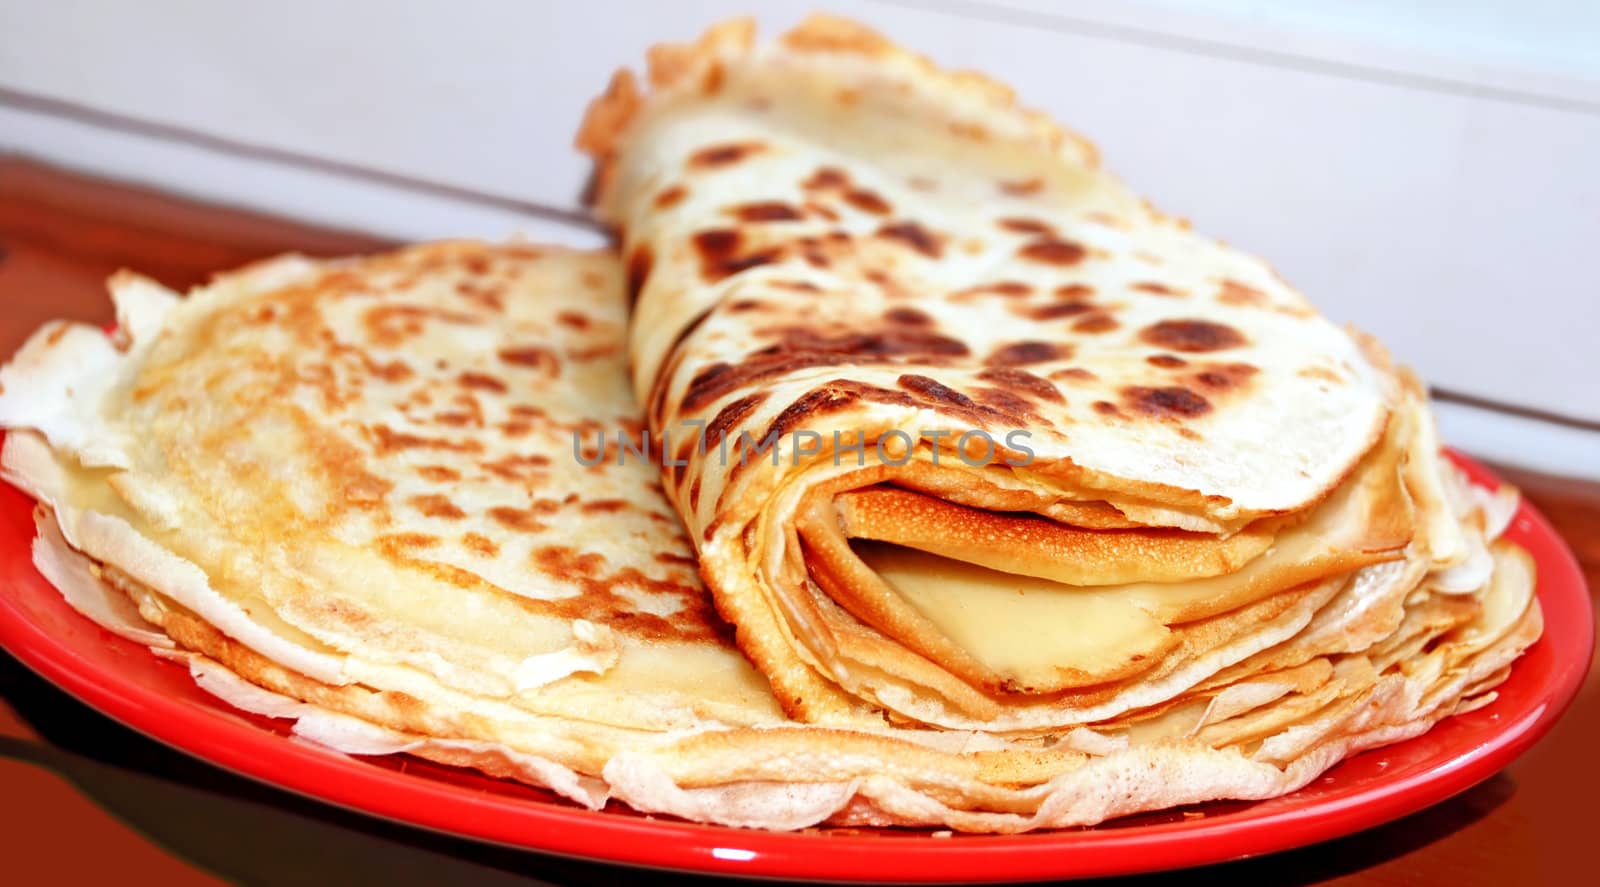 appetizing pancakes on red plate